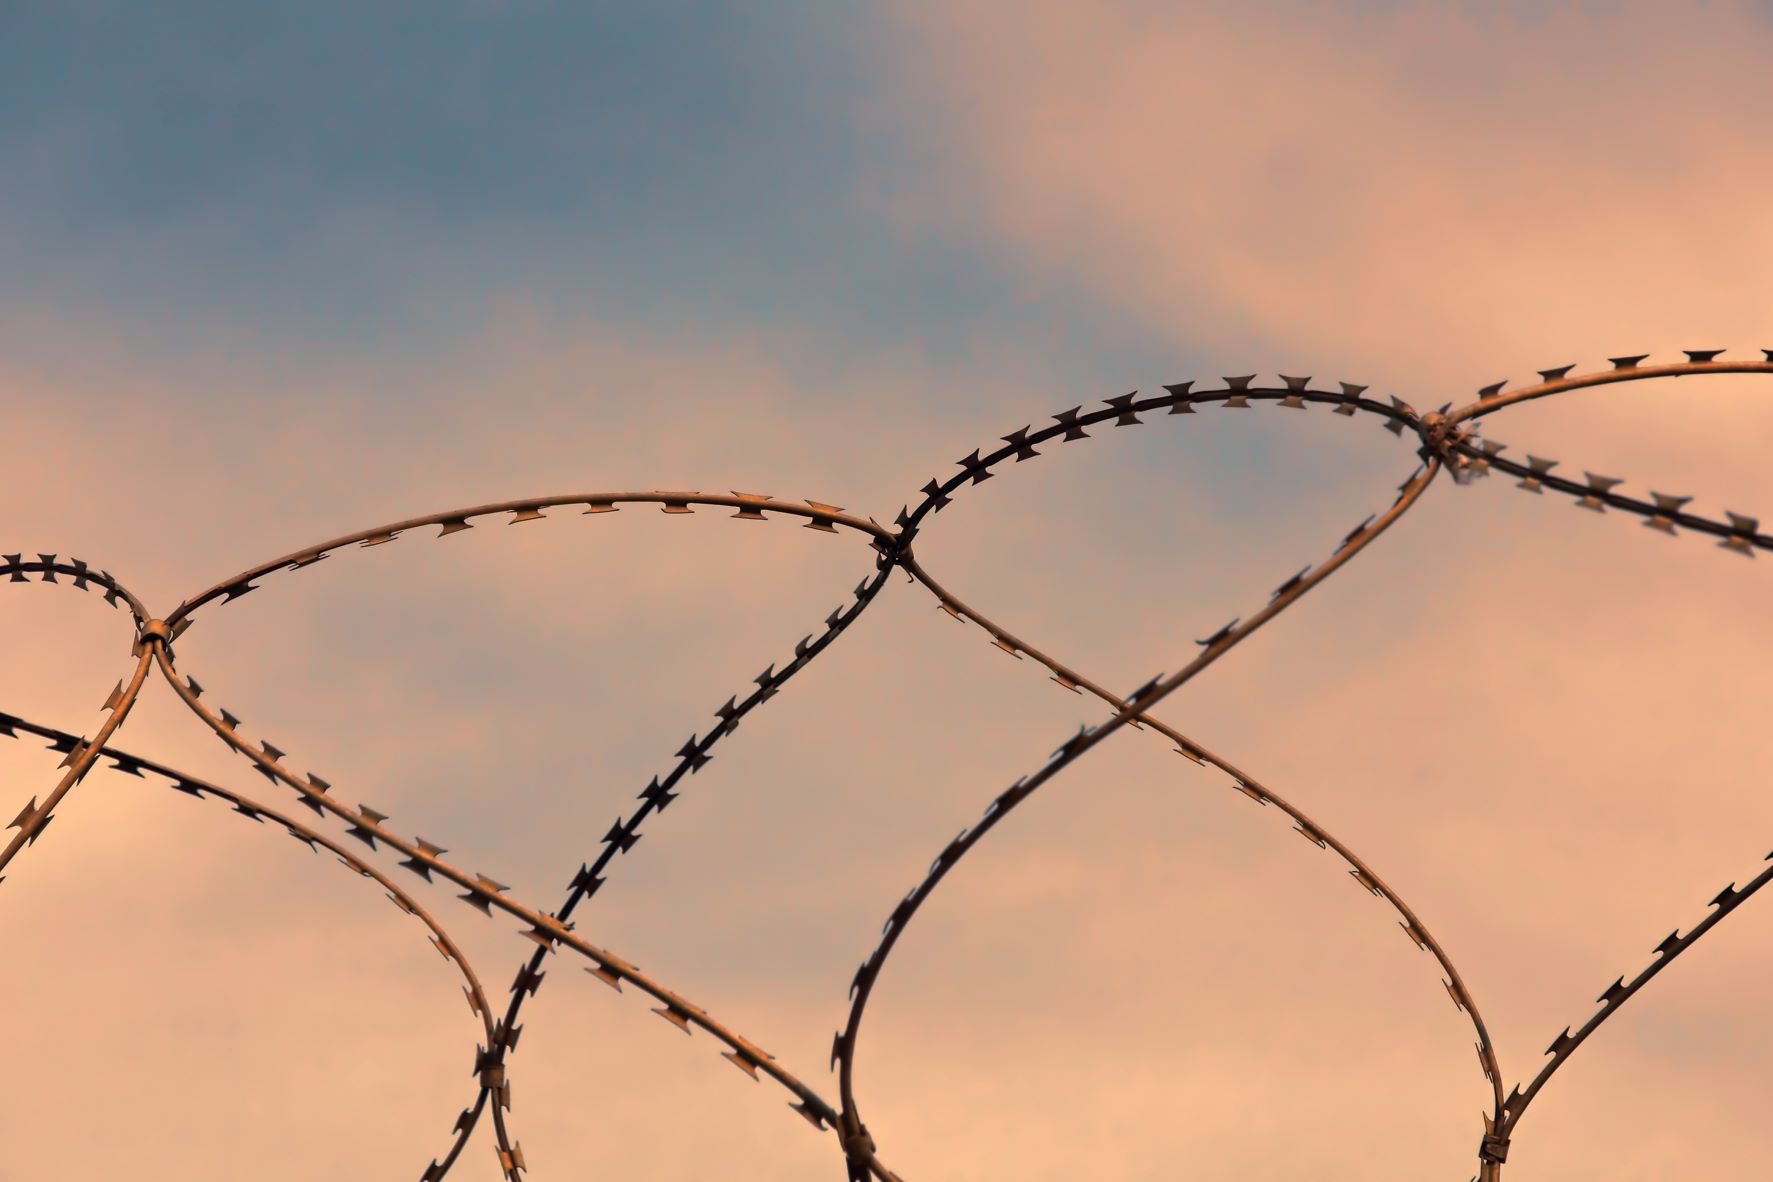 barbed wire in front of a sunrise